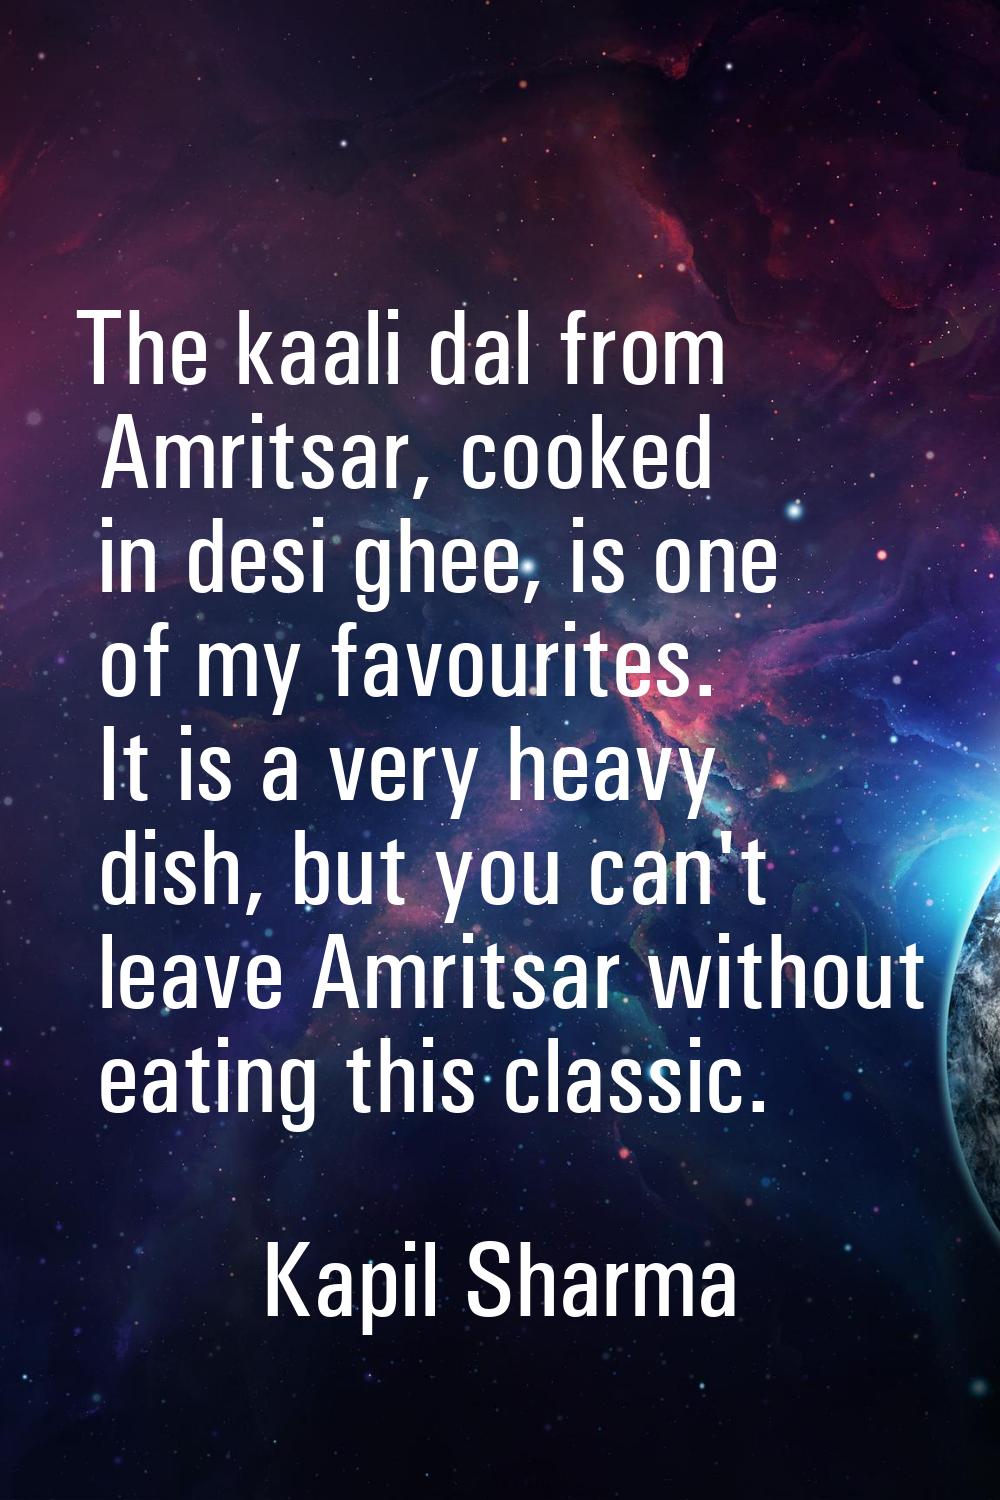 The kaali dal from Amritsar, cooked in desi ghee, is one of my favourites. It is a very heavy dish,